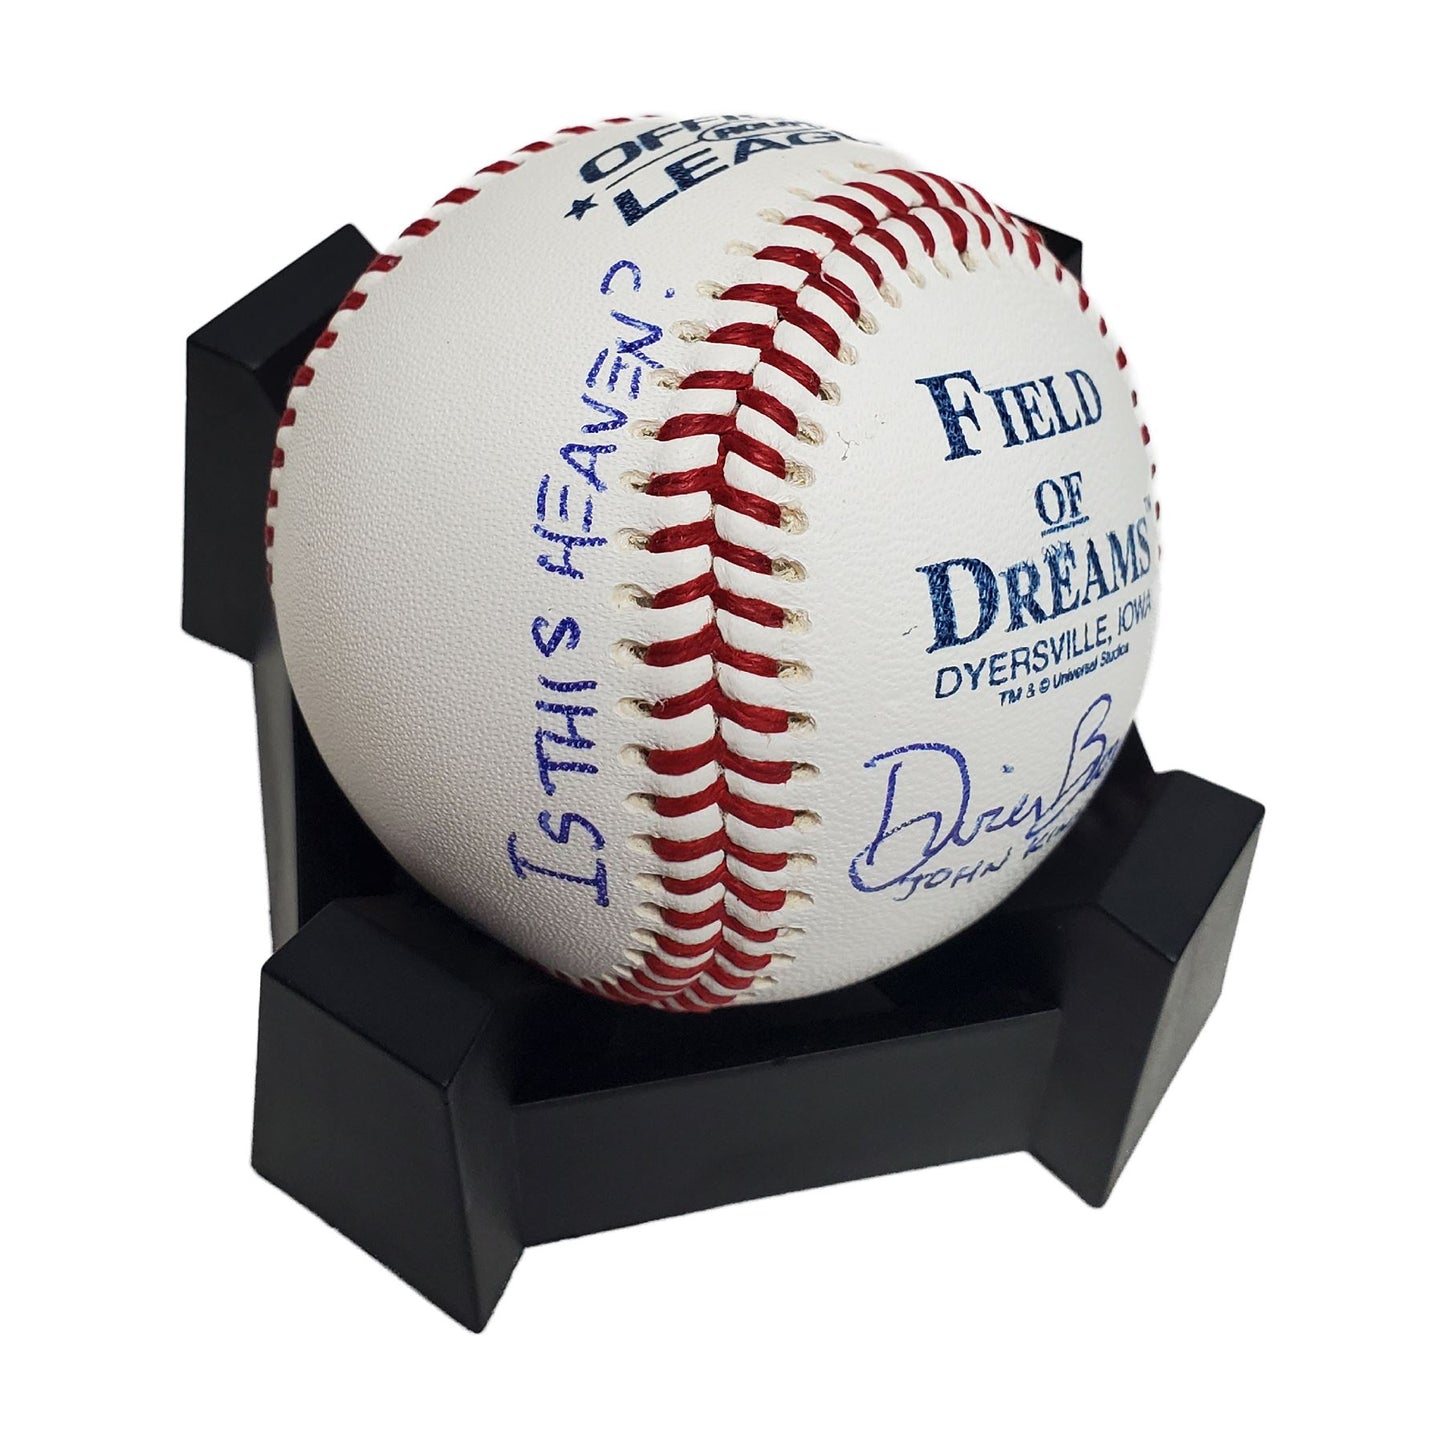 Dwier Brown signed Field of Dreams baseball w/ Is this Heaven Inscription-BAS